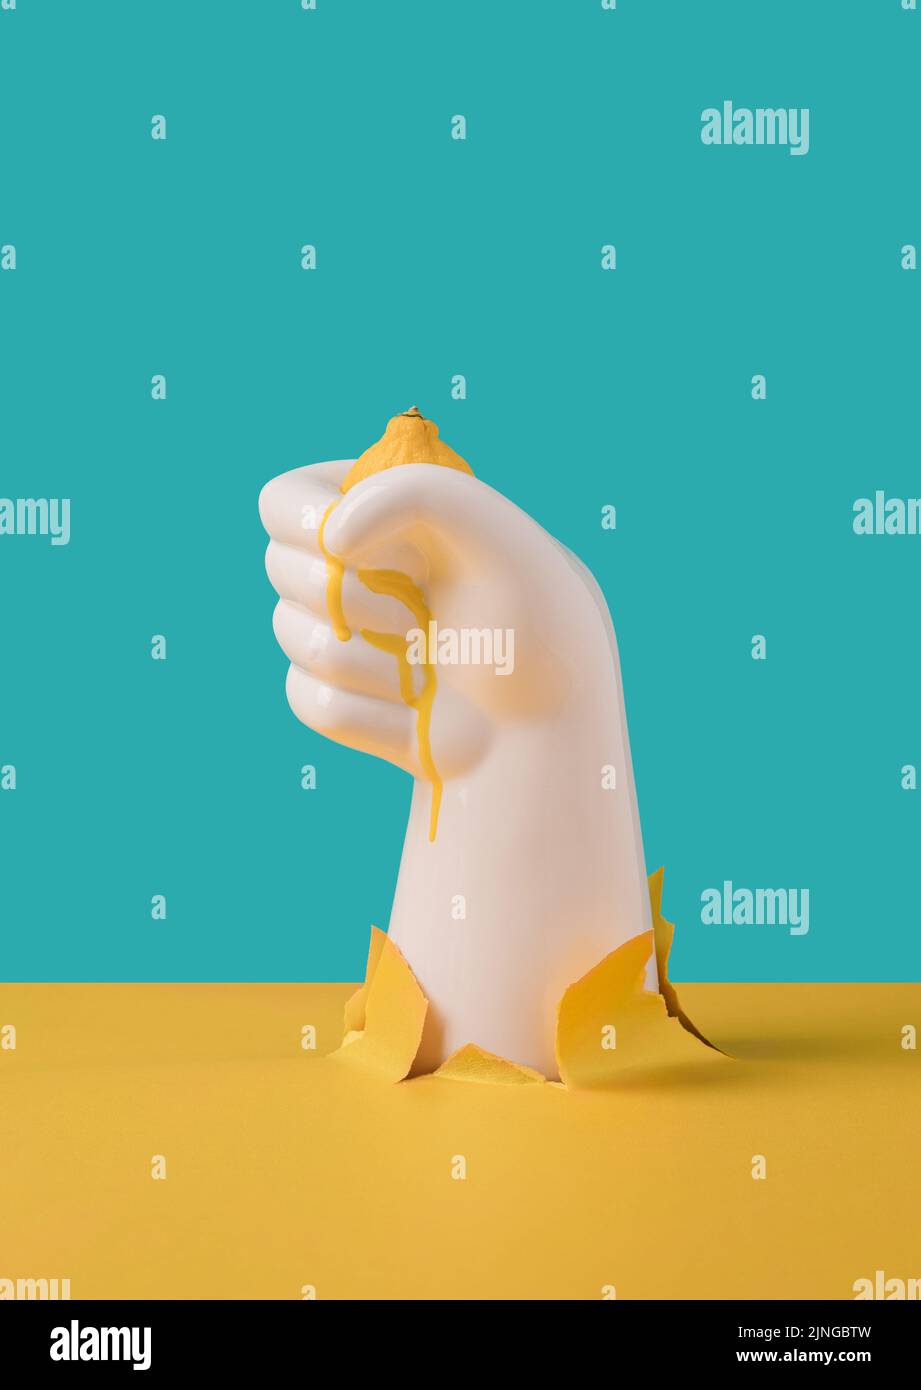 Ceramic hand squeezing lemon with juice dripping. Nature destruction surreal concept. Stock Photo